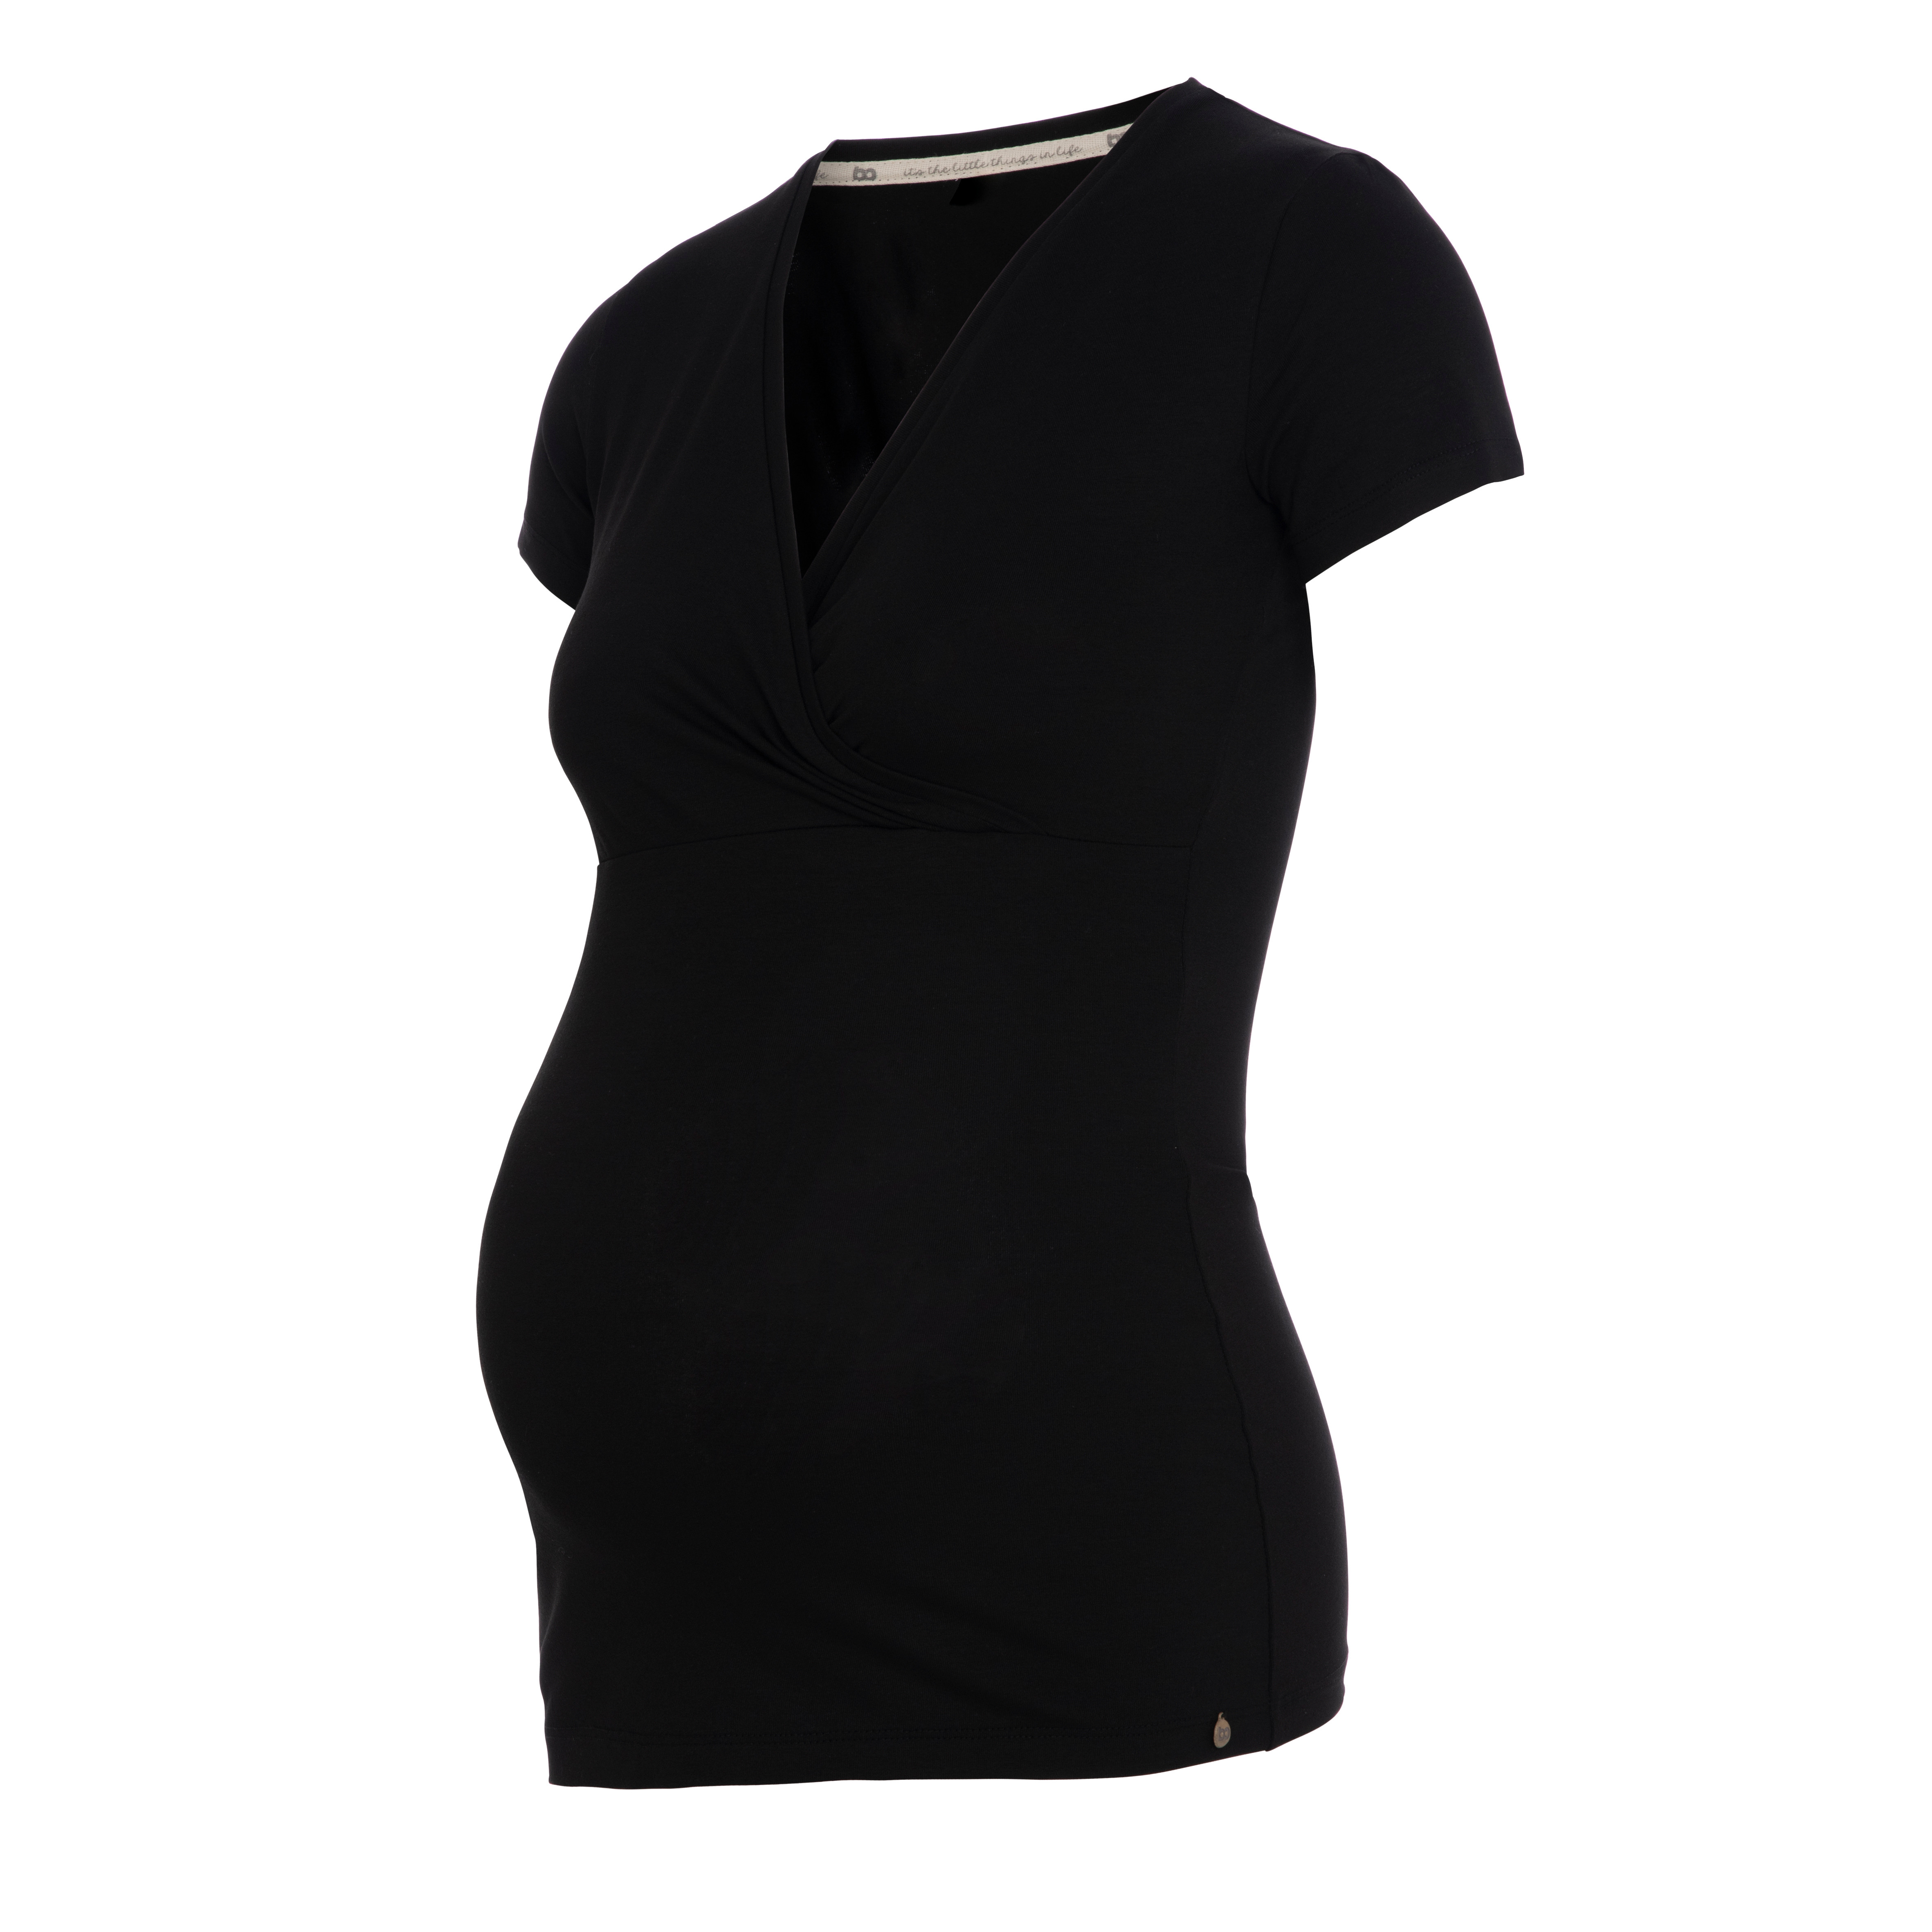 Maternity T-shirt Glow black - S - With nursing function